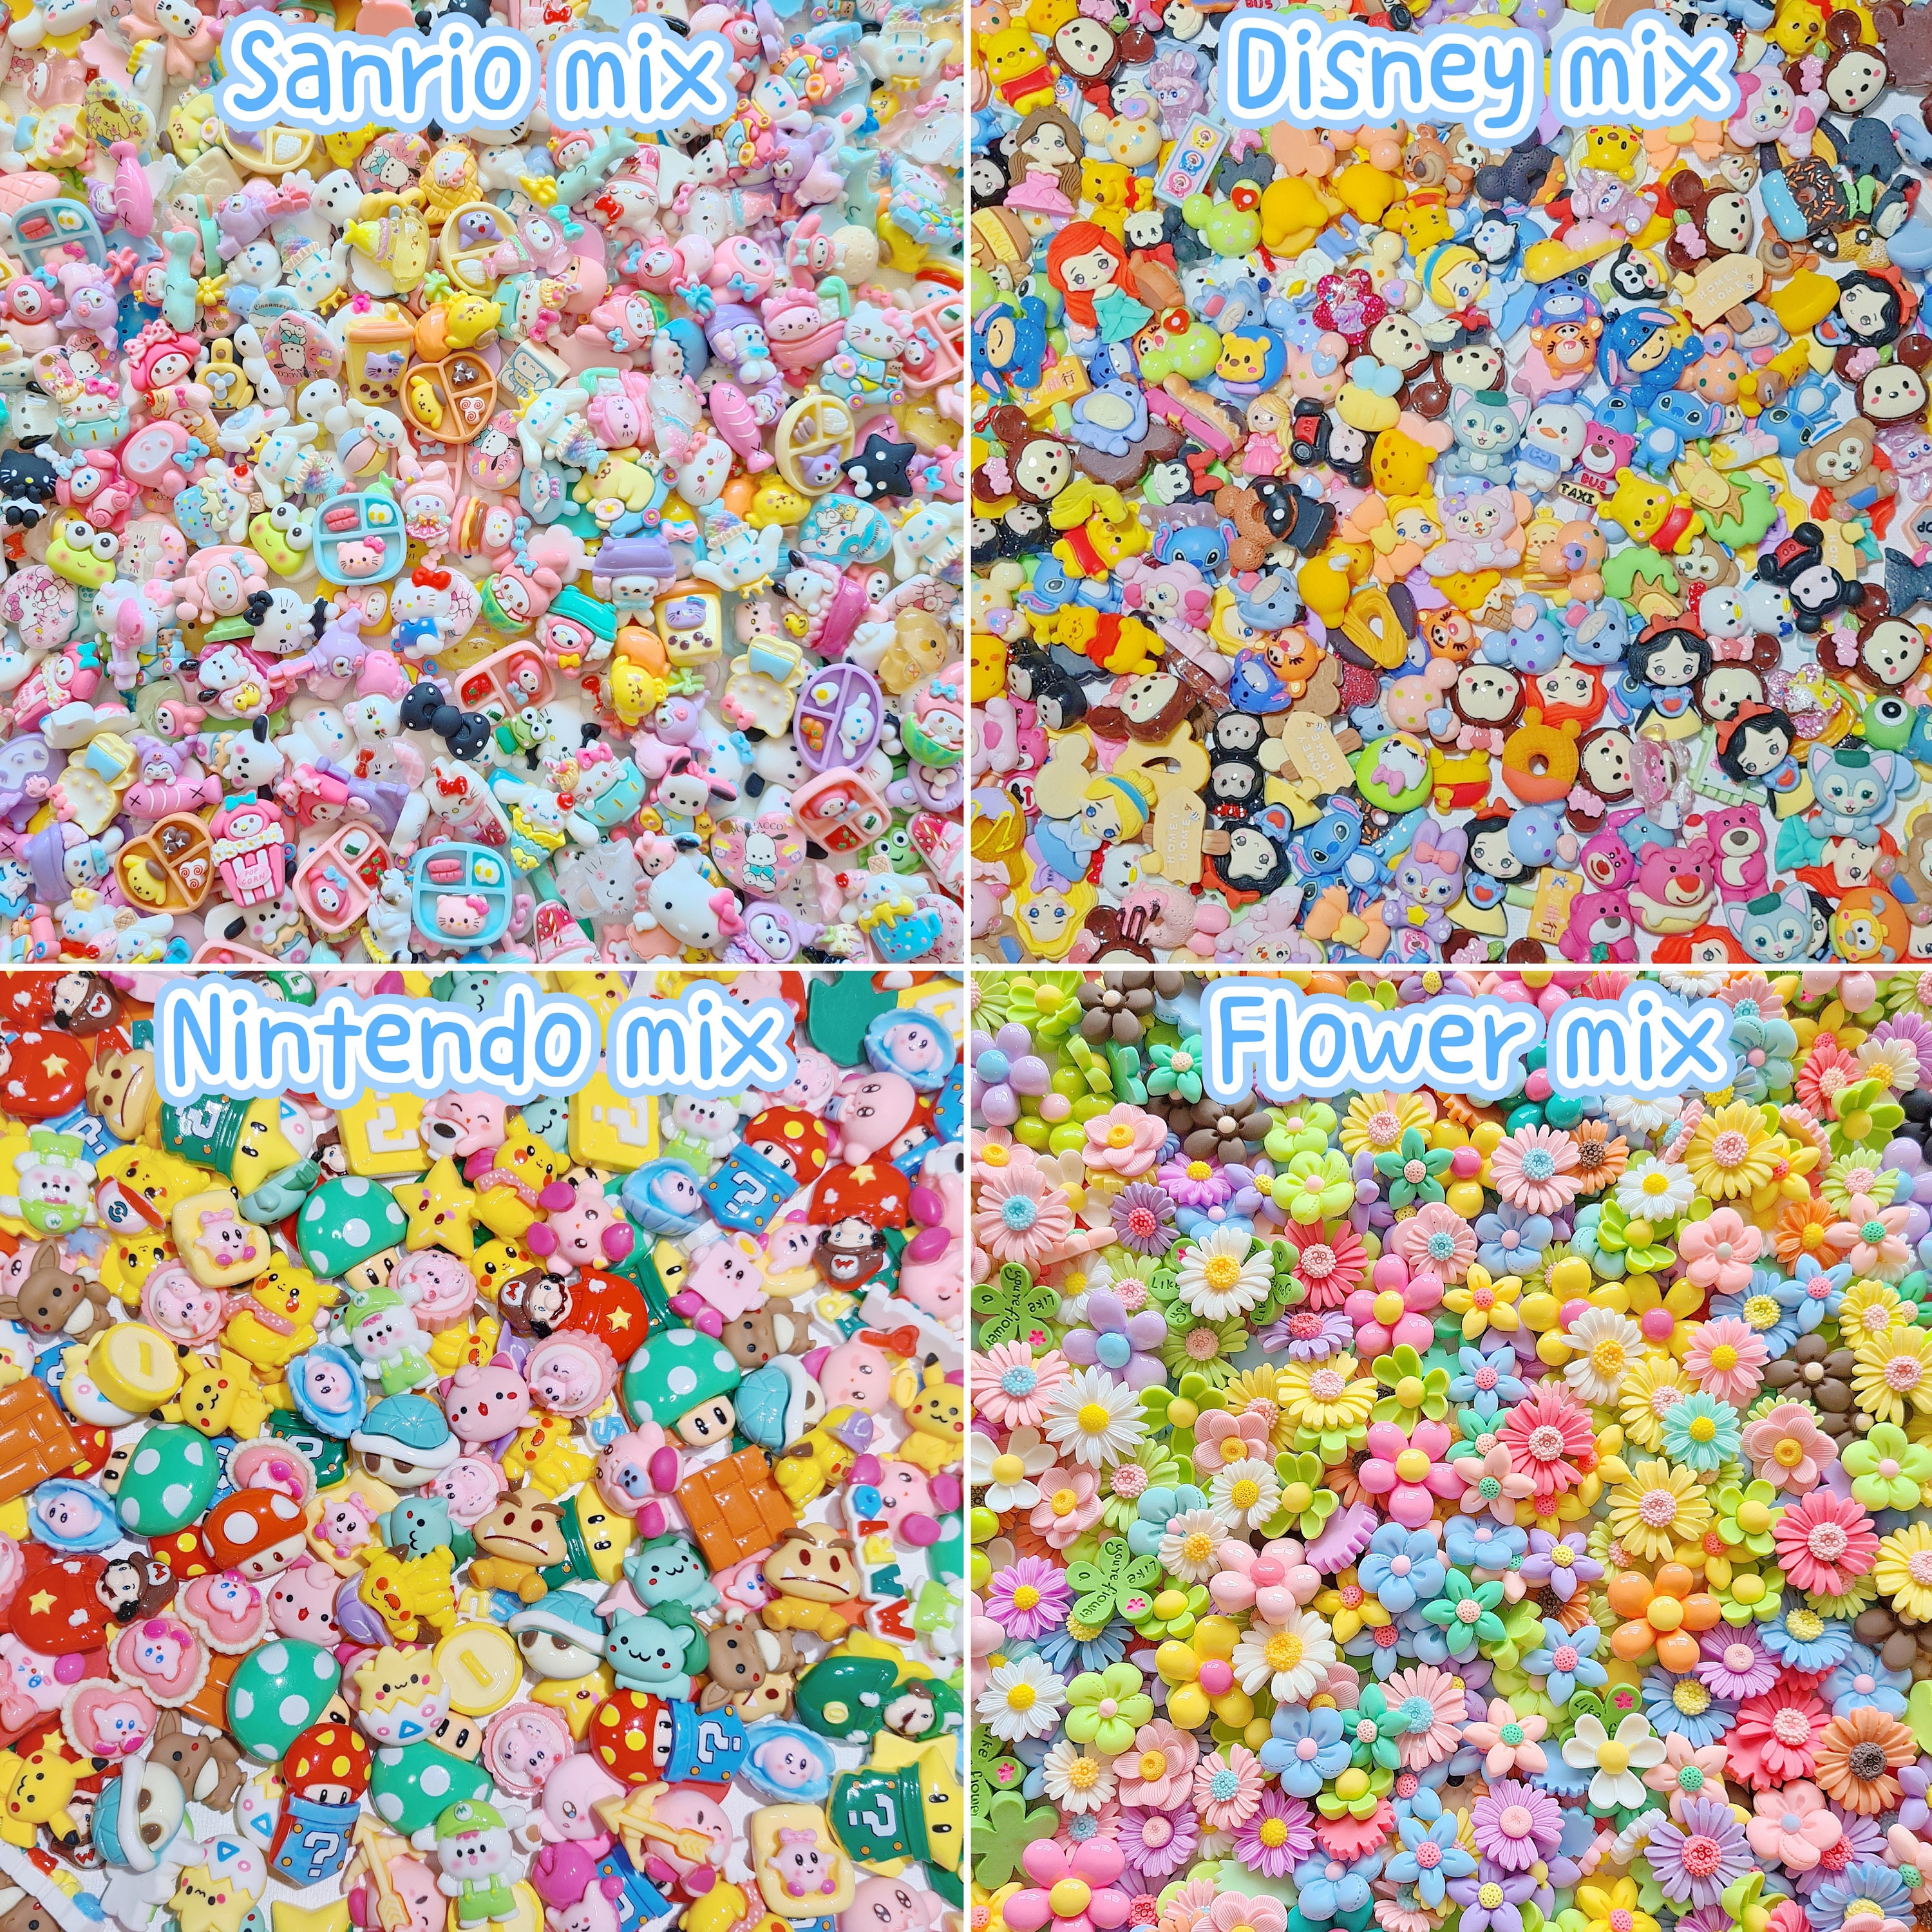 200 pieces) Wholesale Resin Charms 💜